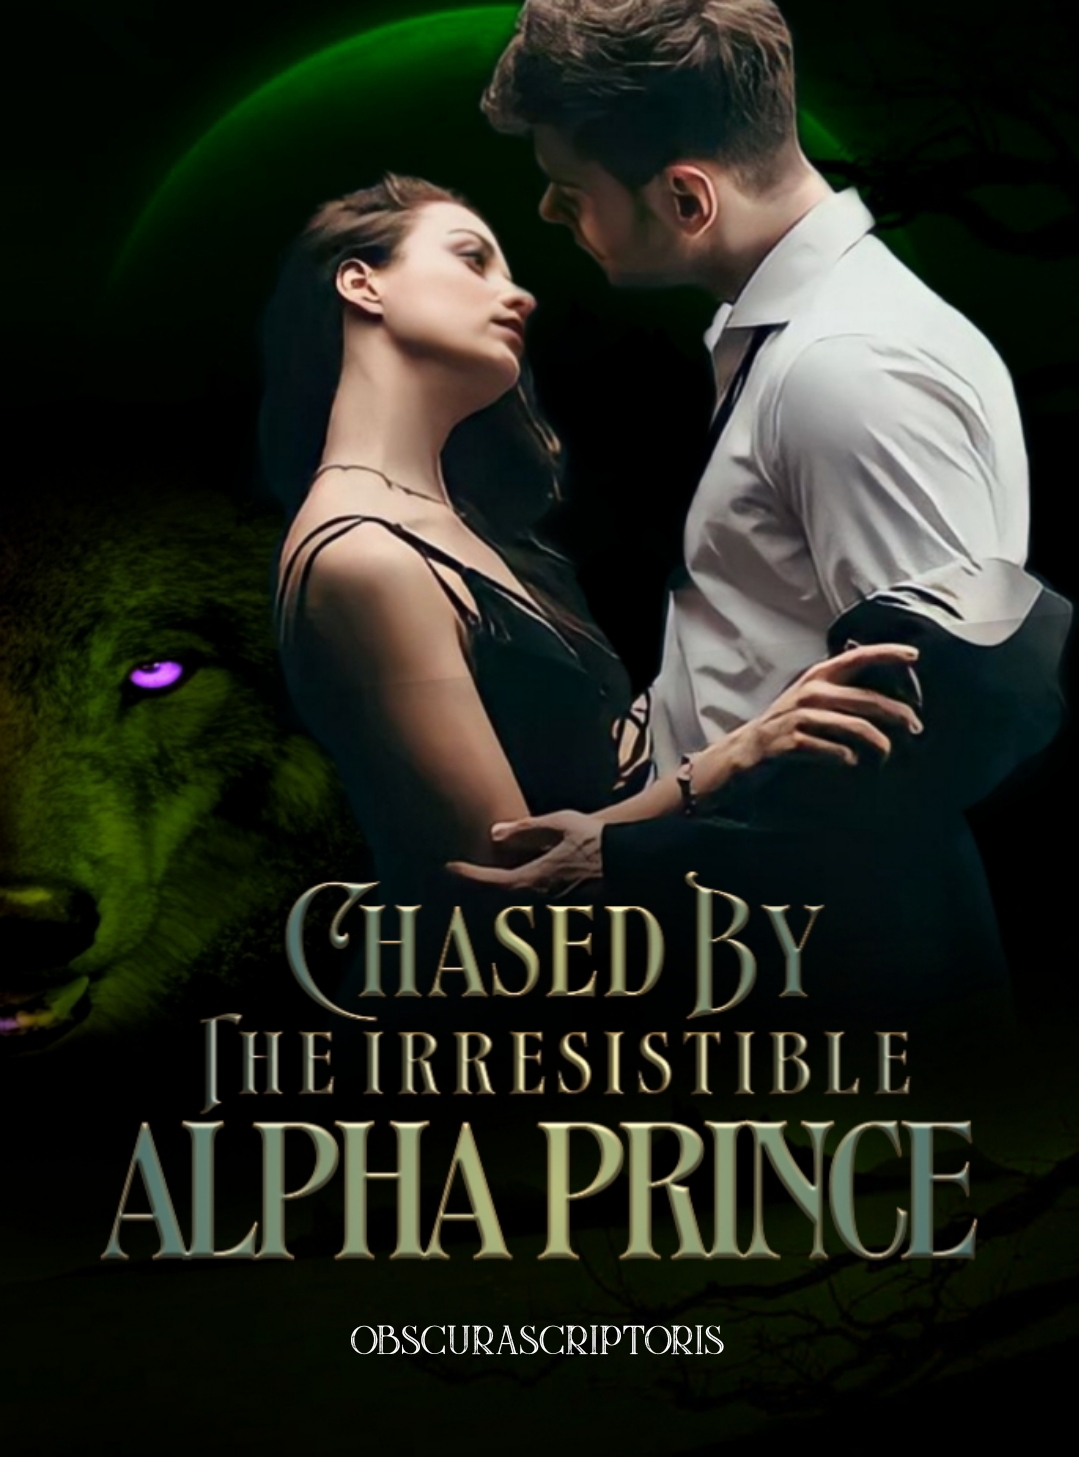 Chased by the Irresistible Alpha Prince By obscurascriptoris | Libri